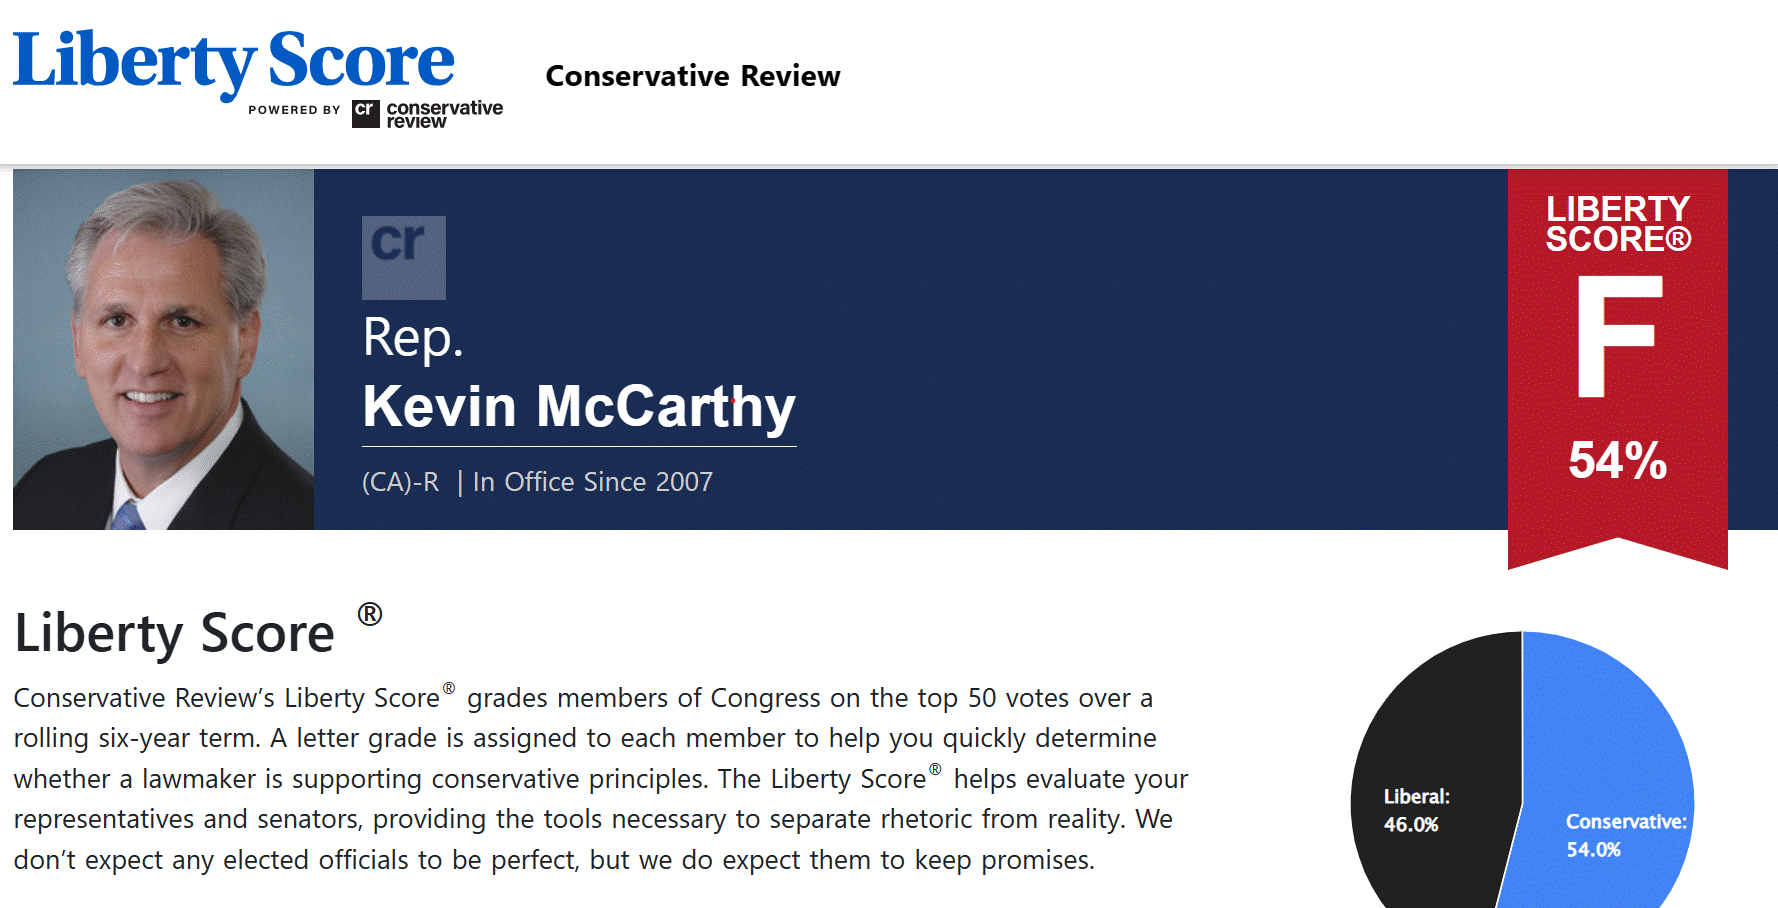 Voting Record of McCarthy